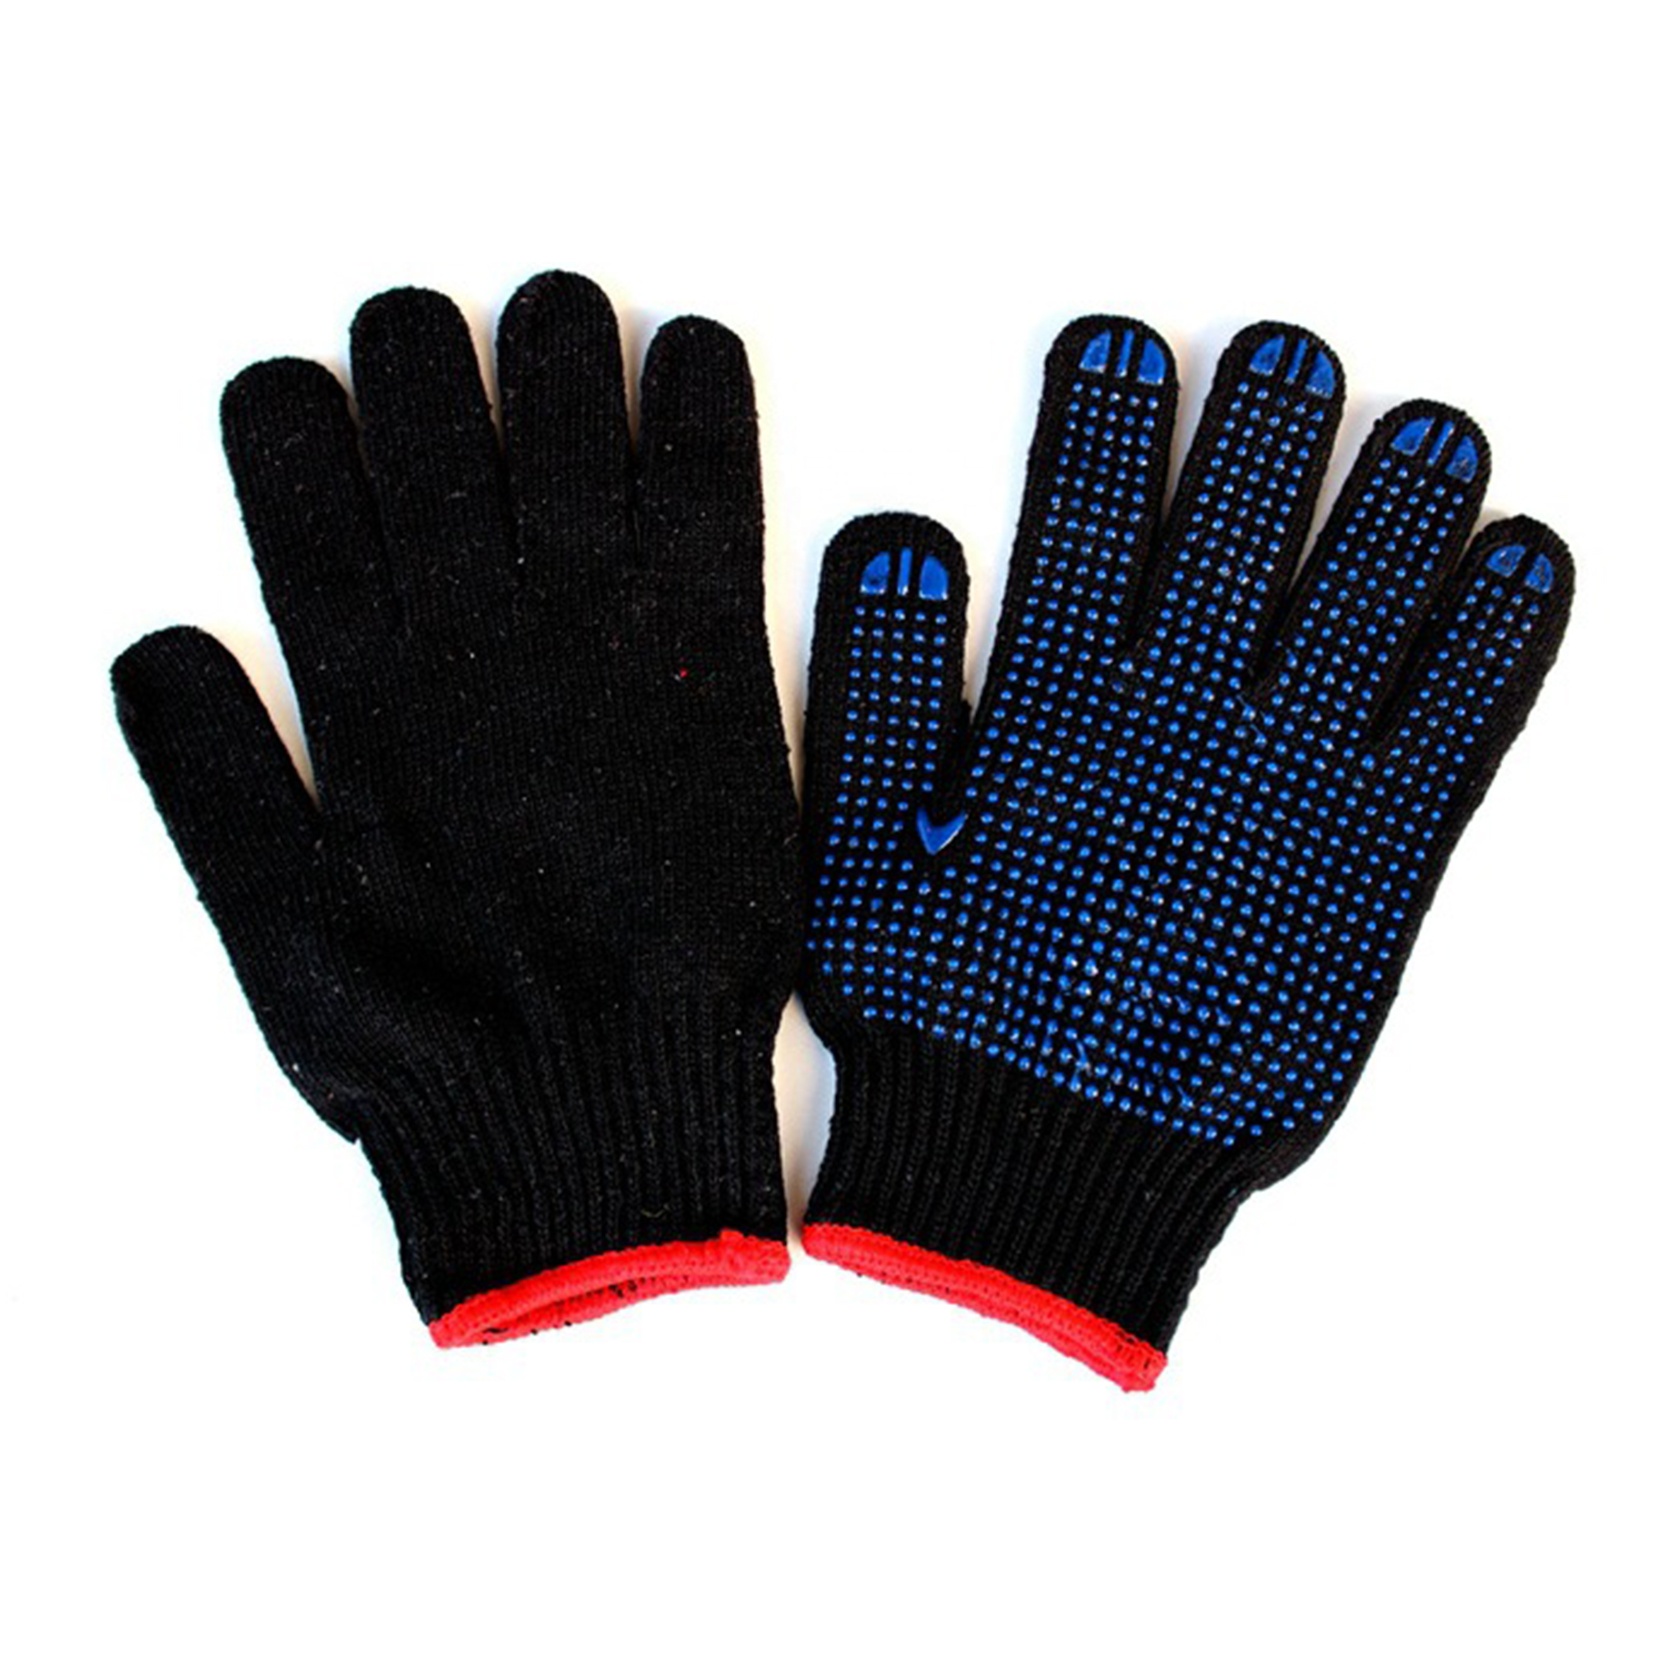 Pvc Dotted Knitted Labour Industrial Touch Nylon လက်အိတ် (၃) လုံး၊